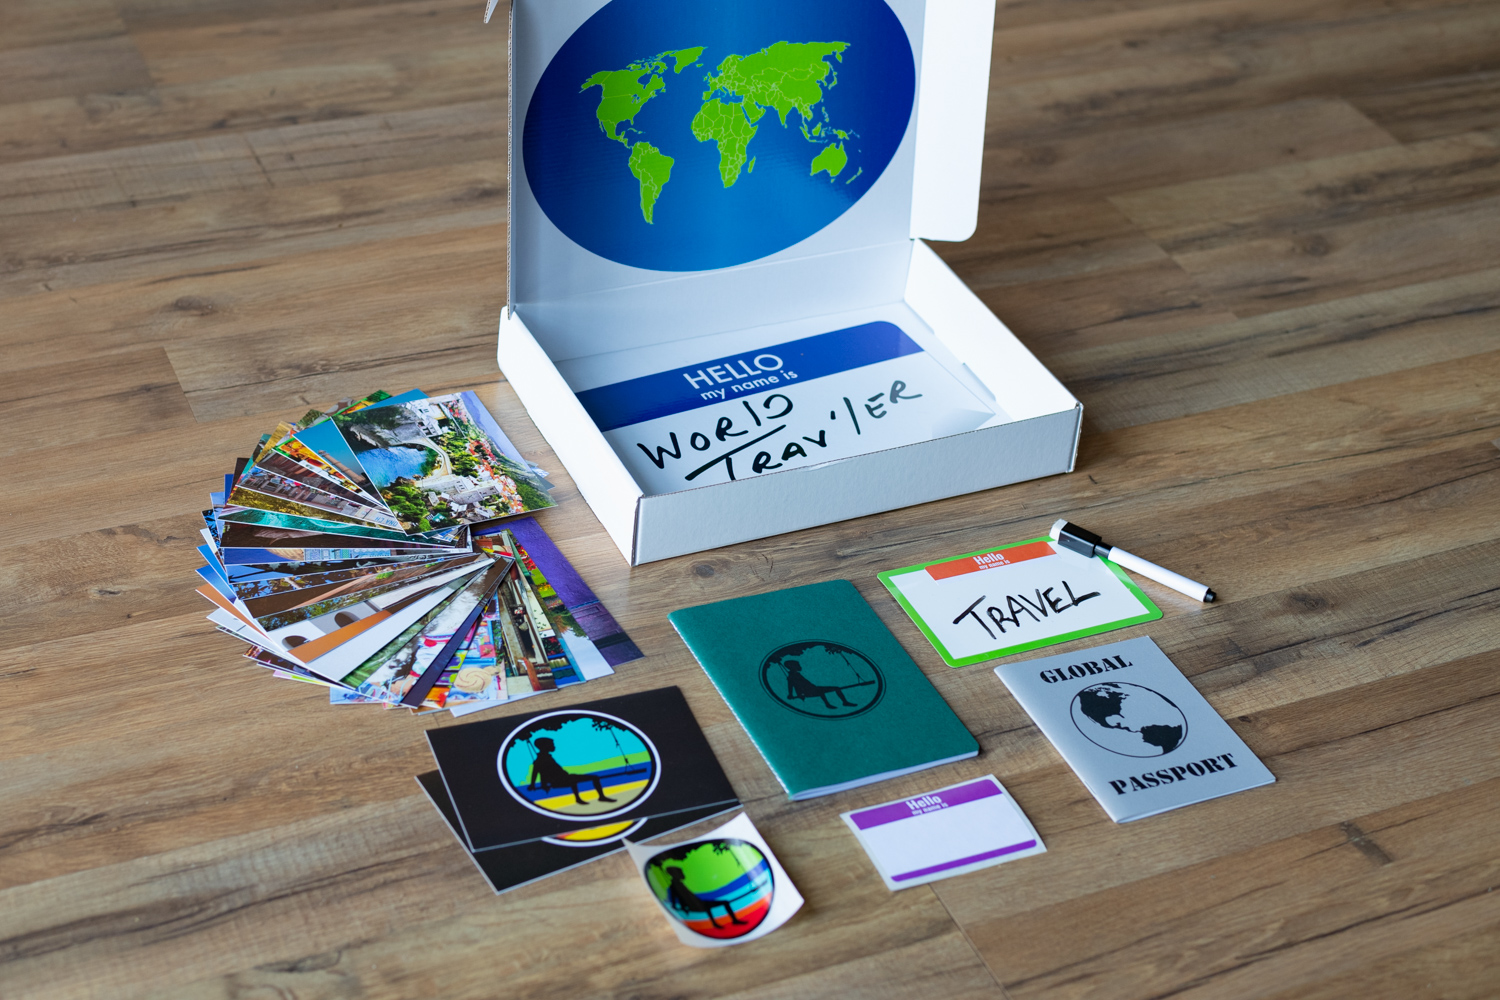 Collectible boxes for Hello my name is world traveler